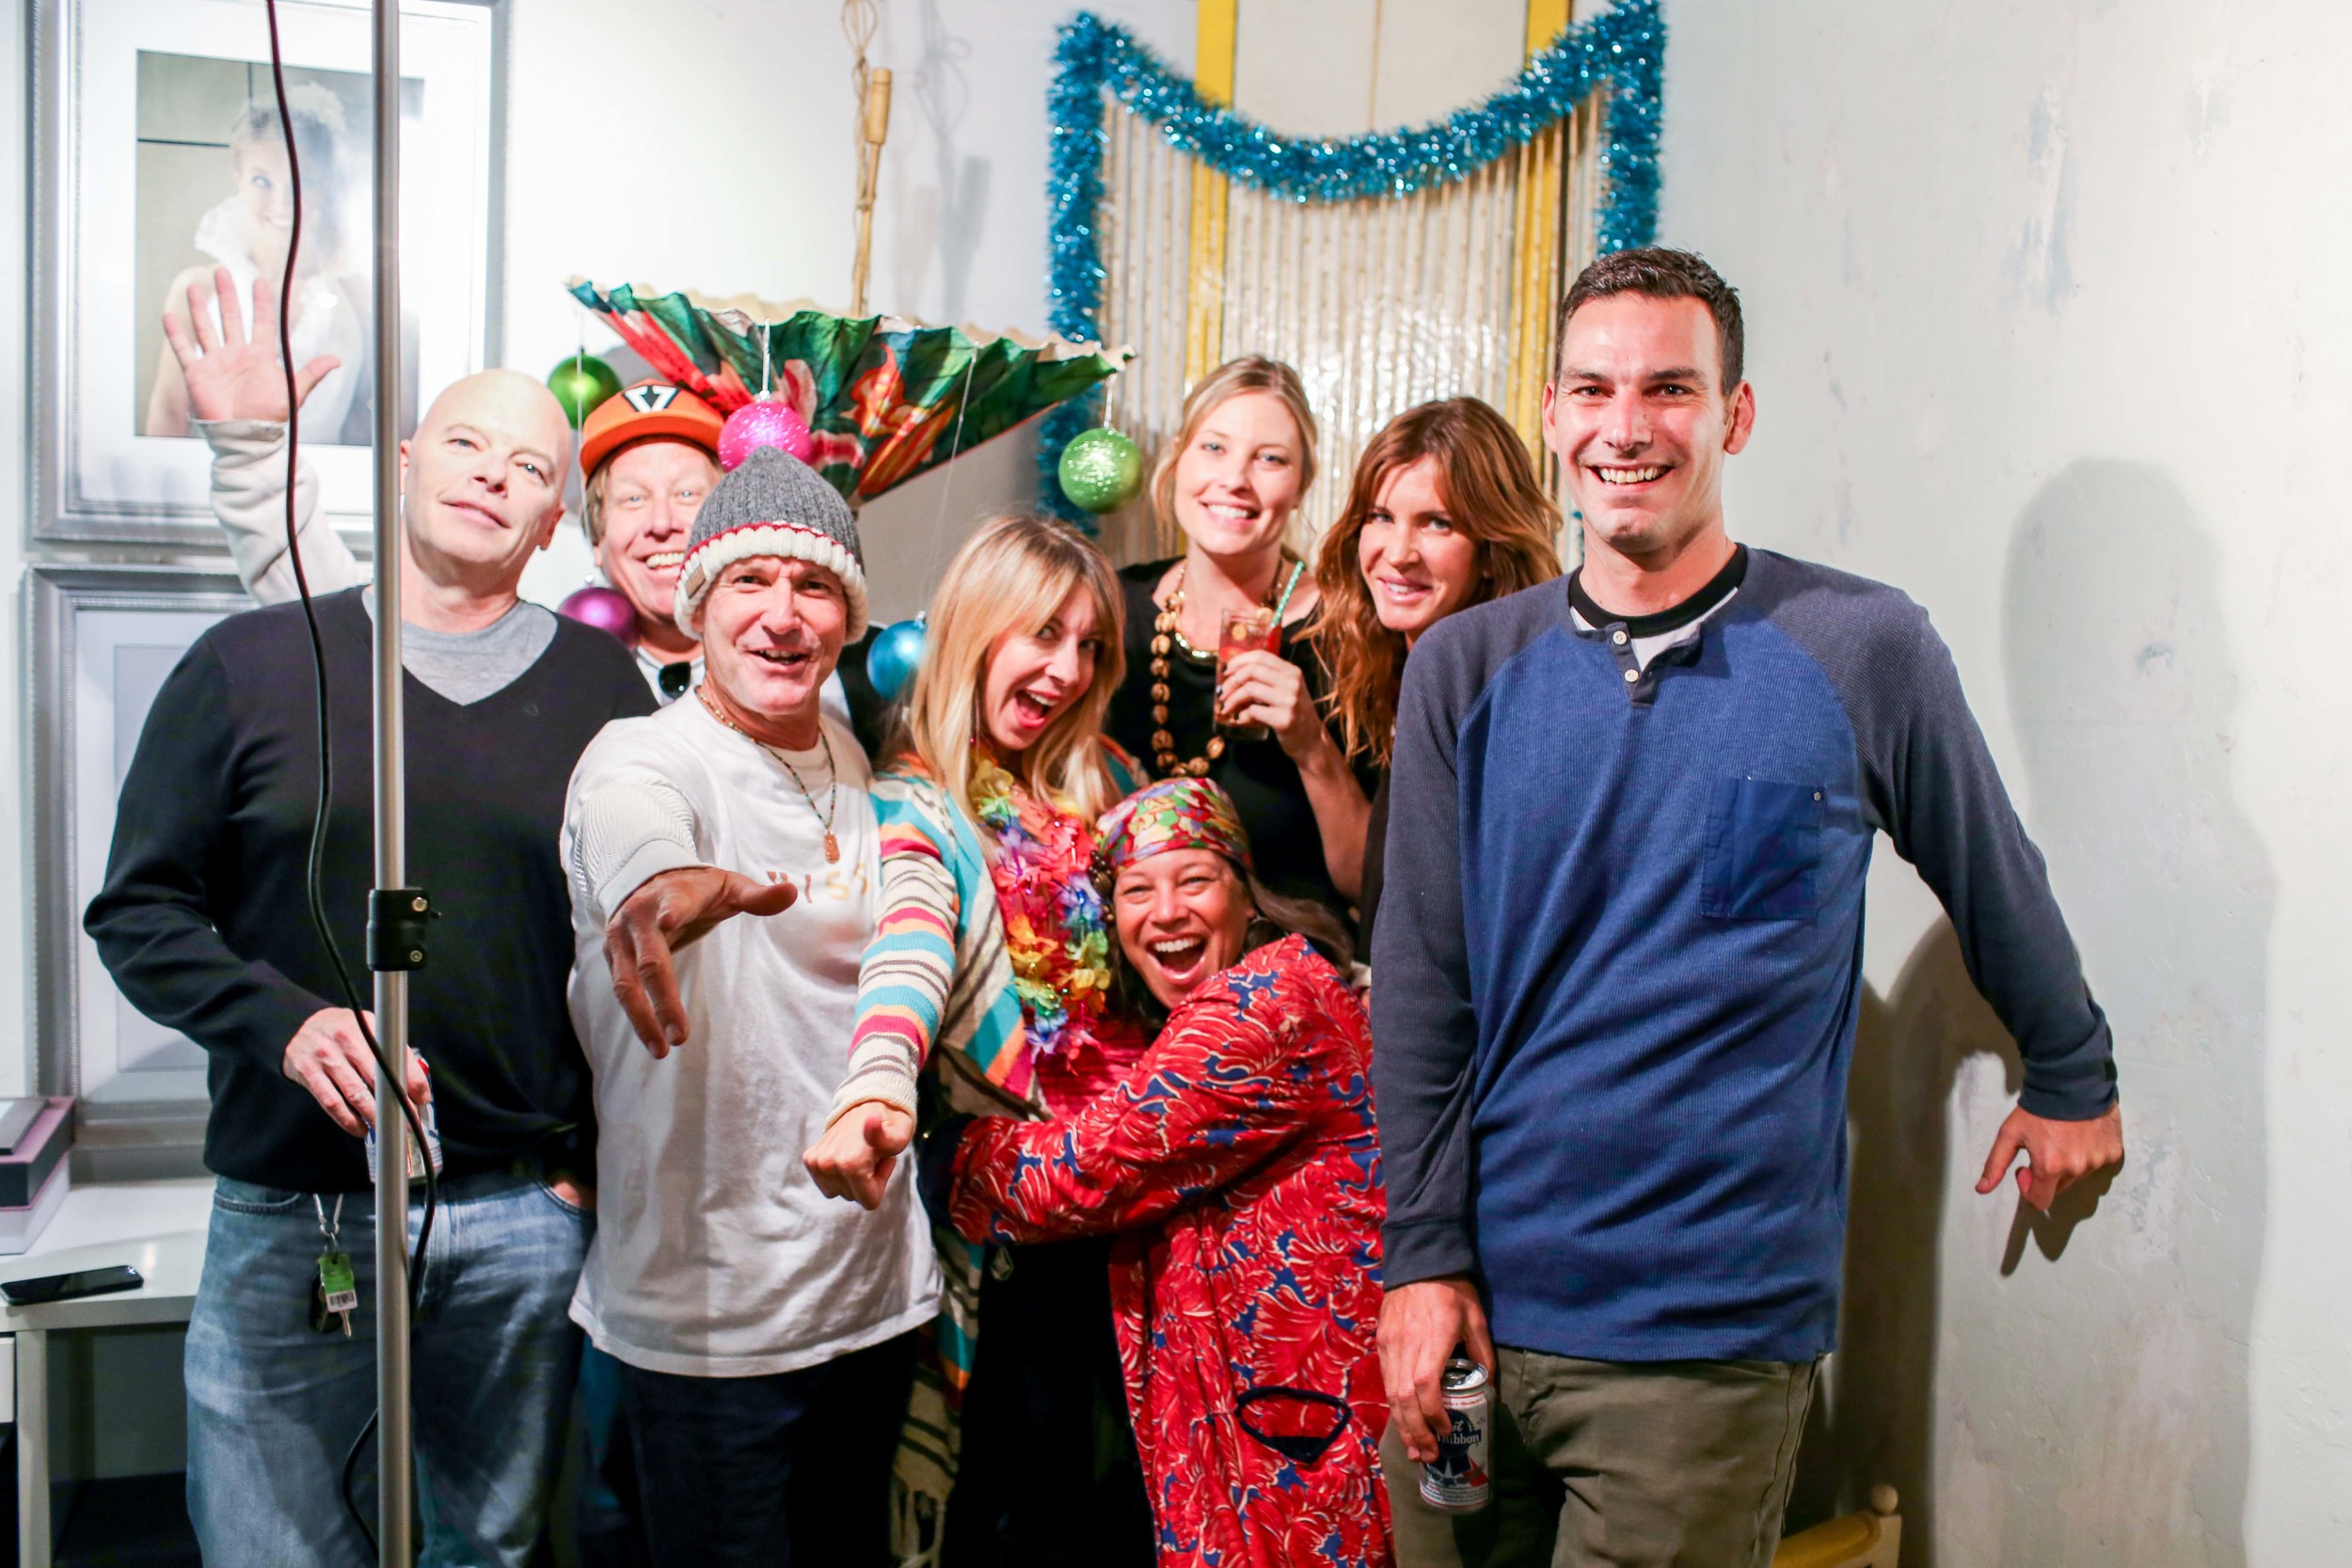 SOURCED. a california collective // Hawaiian Holiday Party